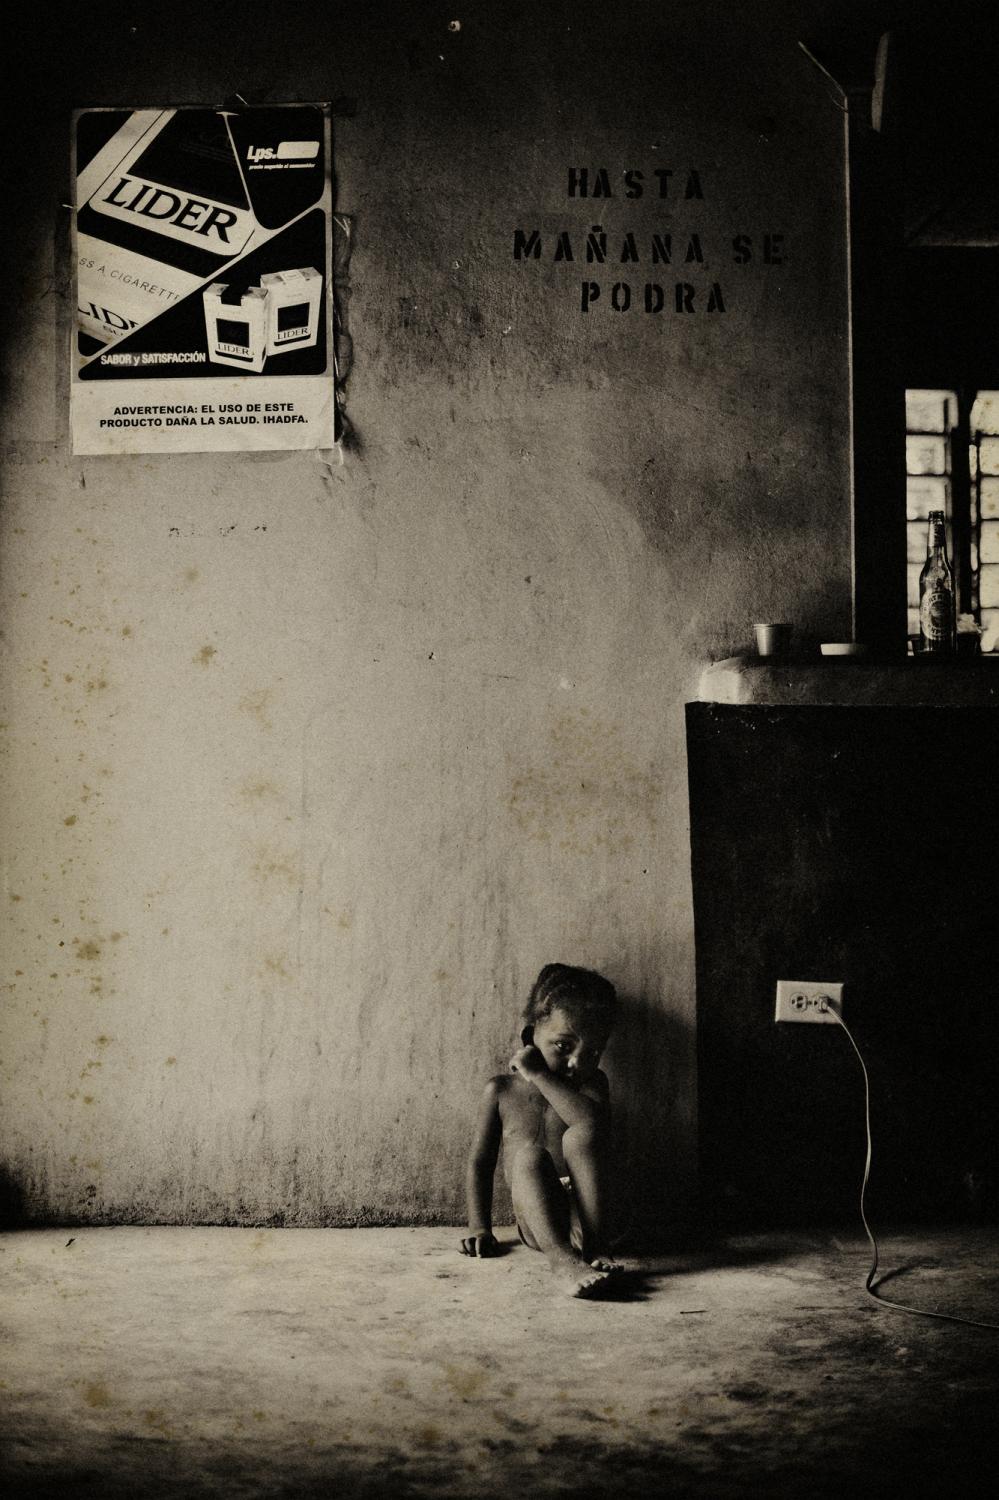 Orphans of the storm - Honduras.
February 2008.
A young girl sitting inside a...